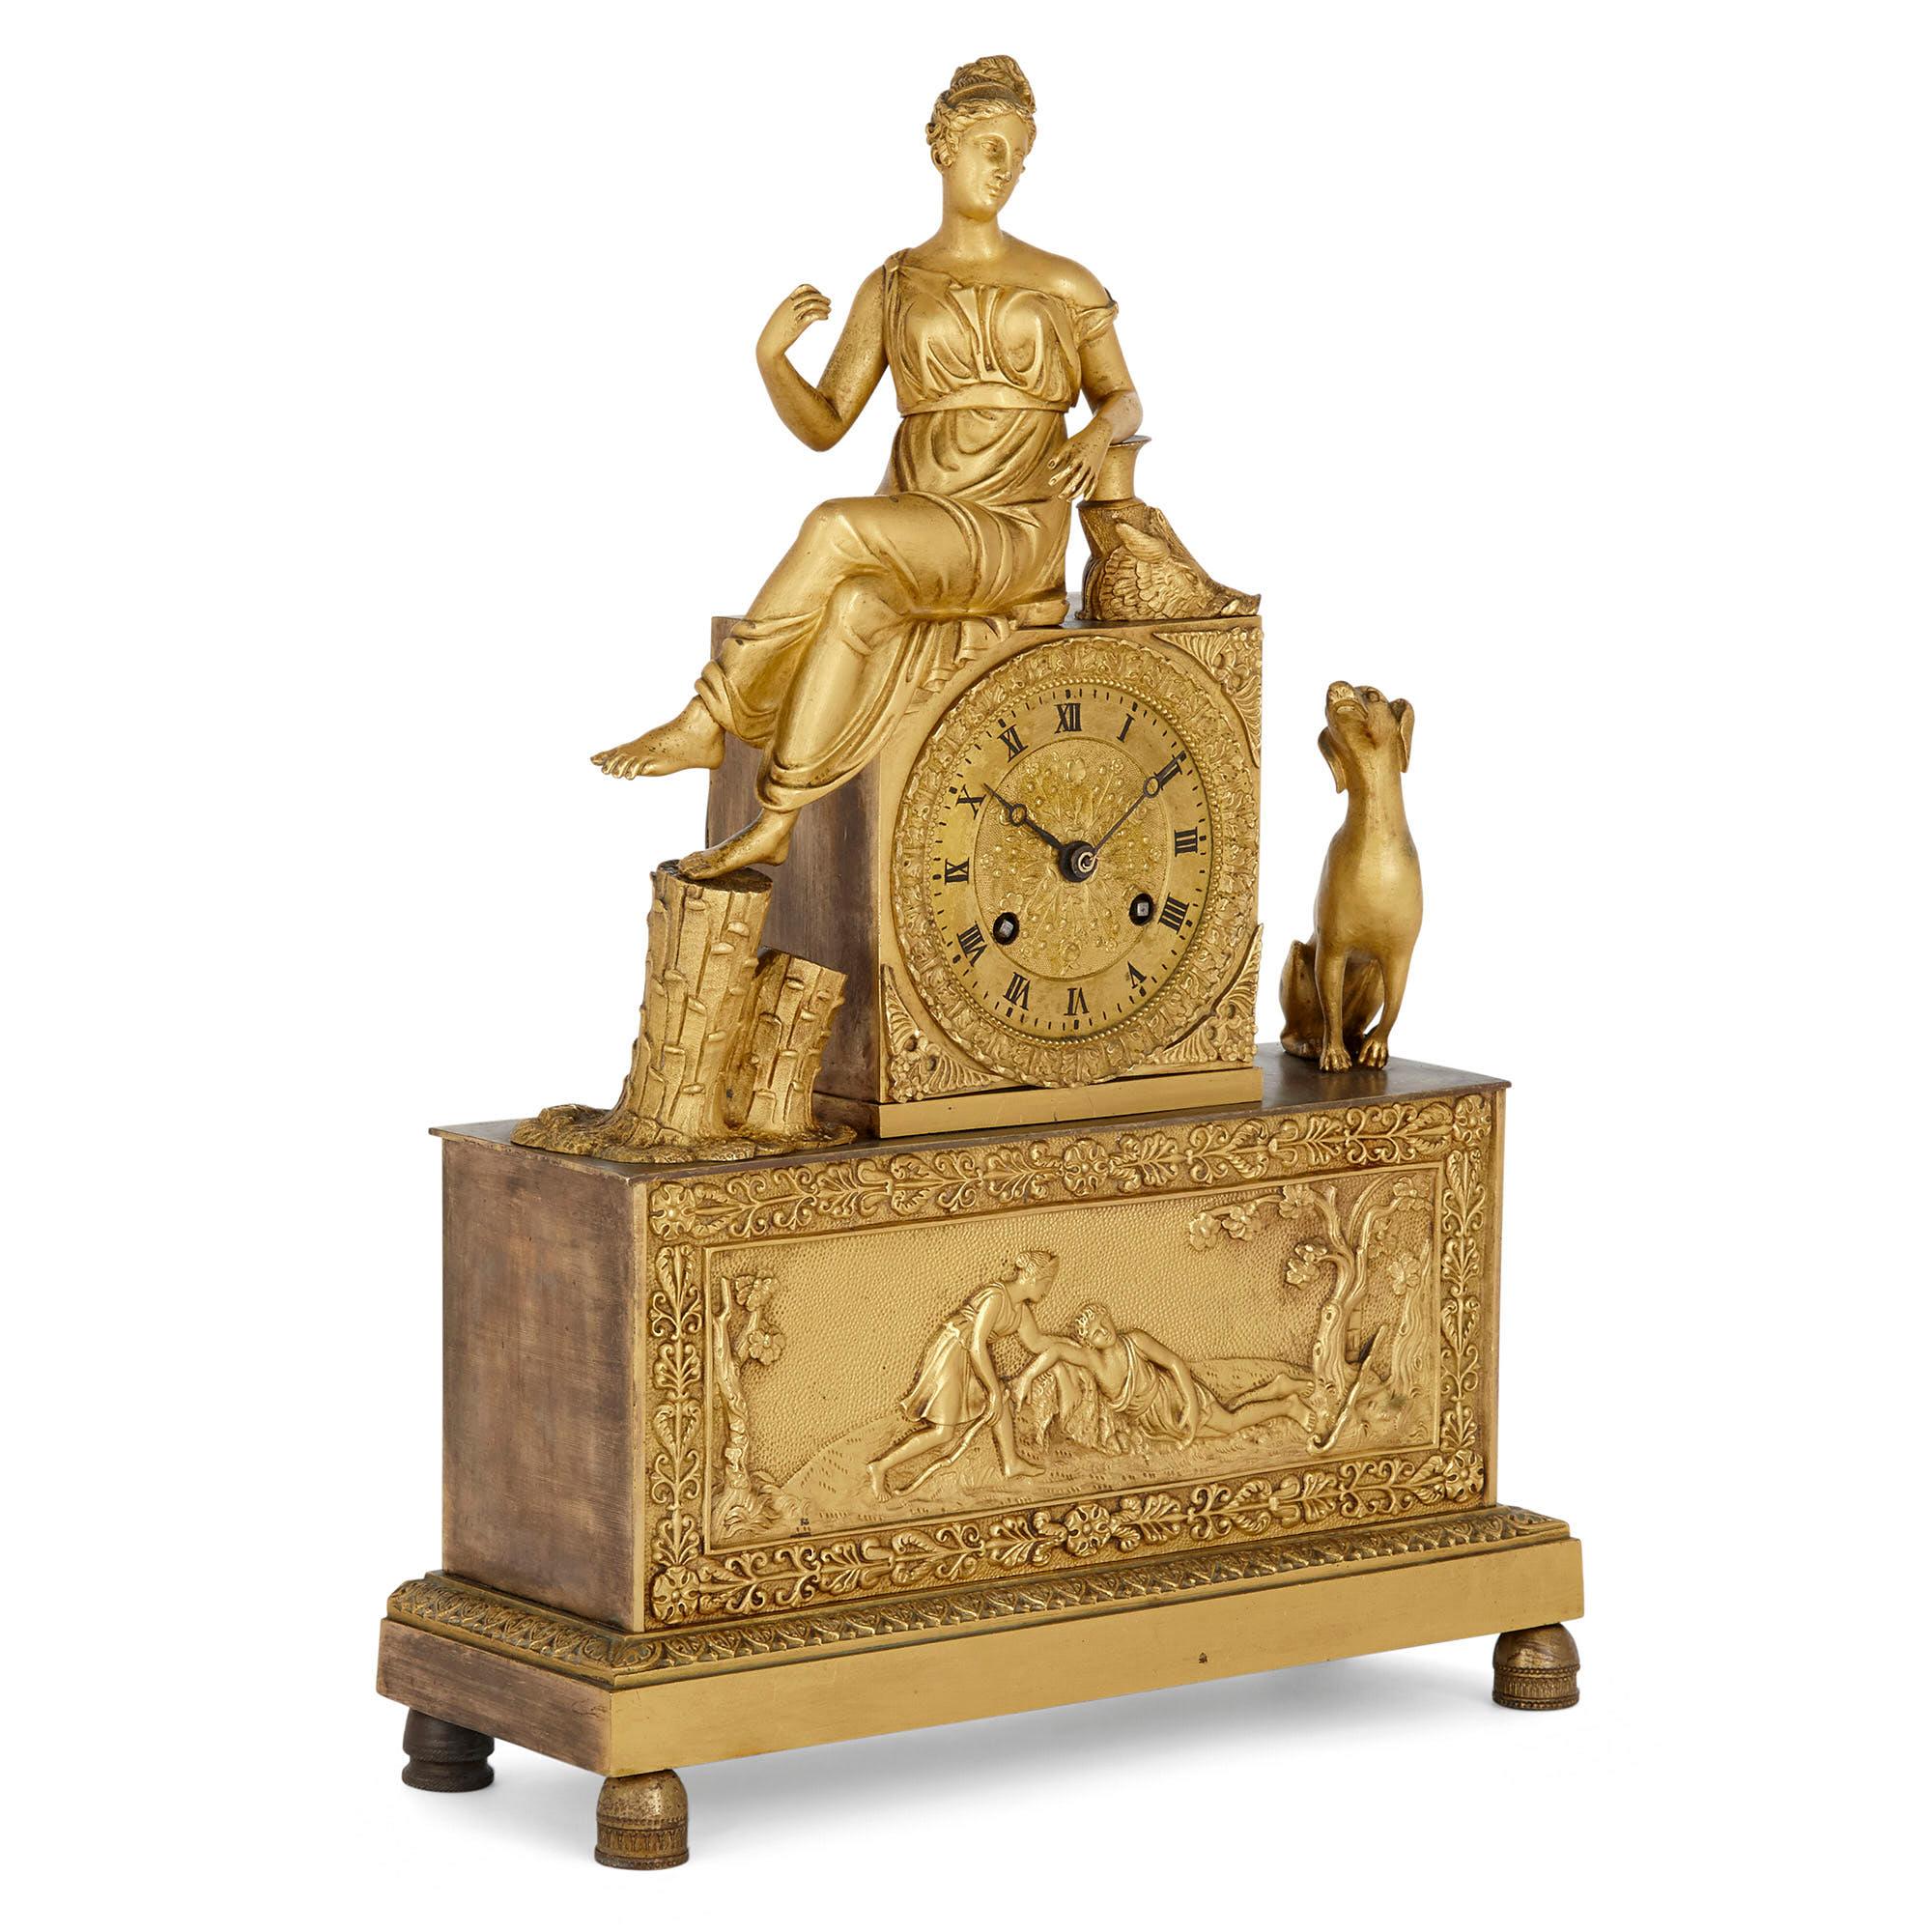 French Empire gilt bronze clock
French, early 19th century
Measures: Height 38cm, width 27cm, depth 10cm

This fine gilt bronze mantel clock is an excellent example of the manner and style of clock that predominated during the Empire